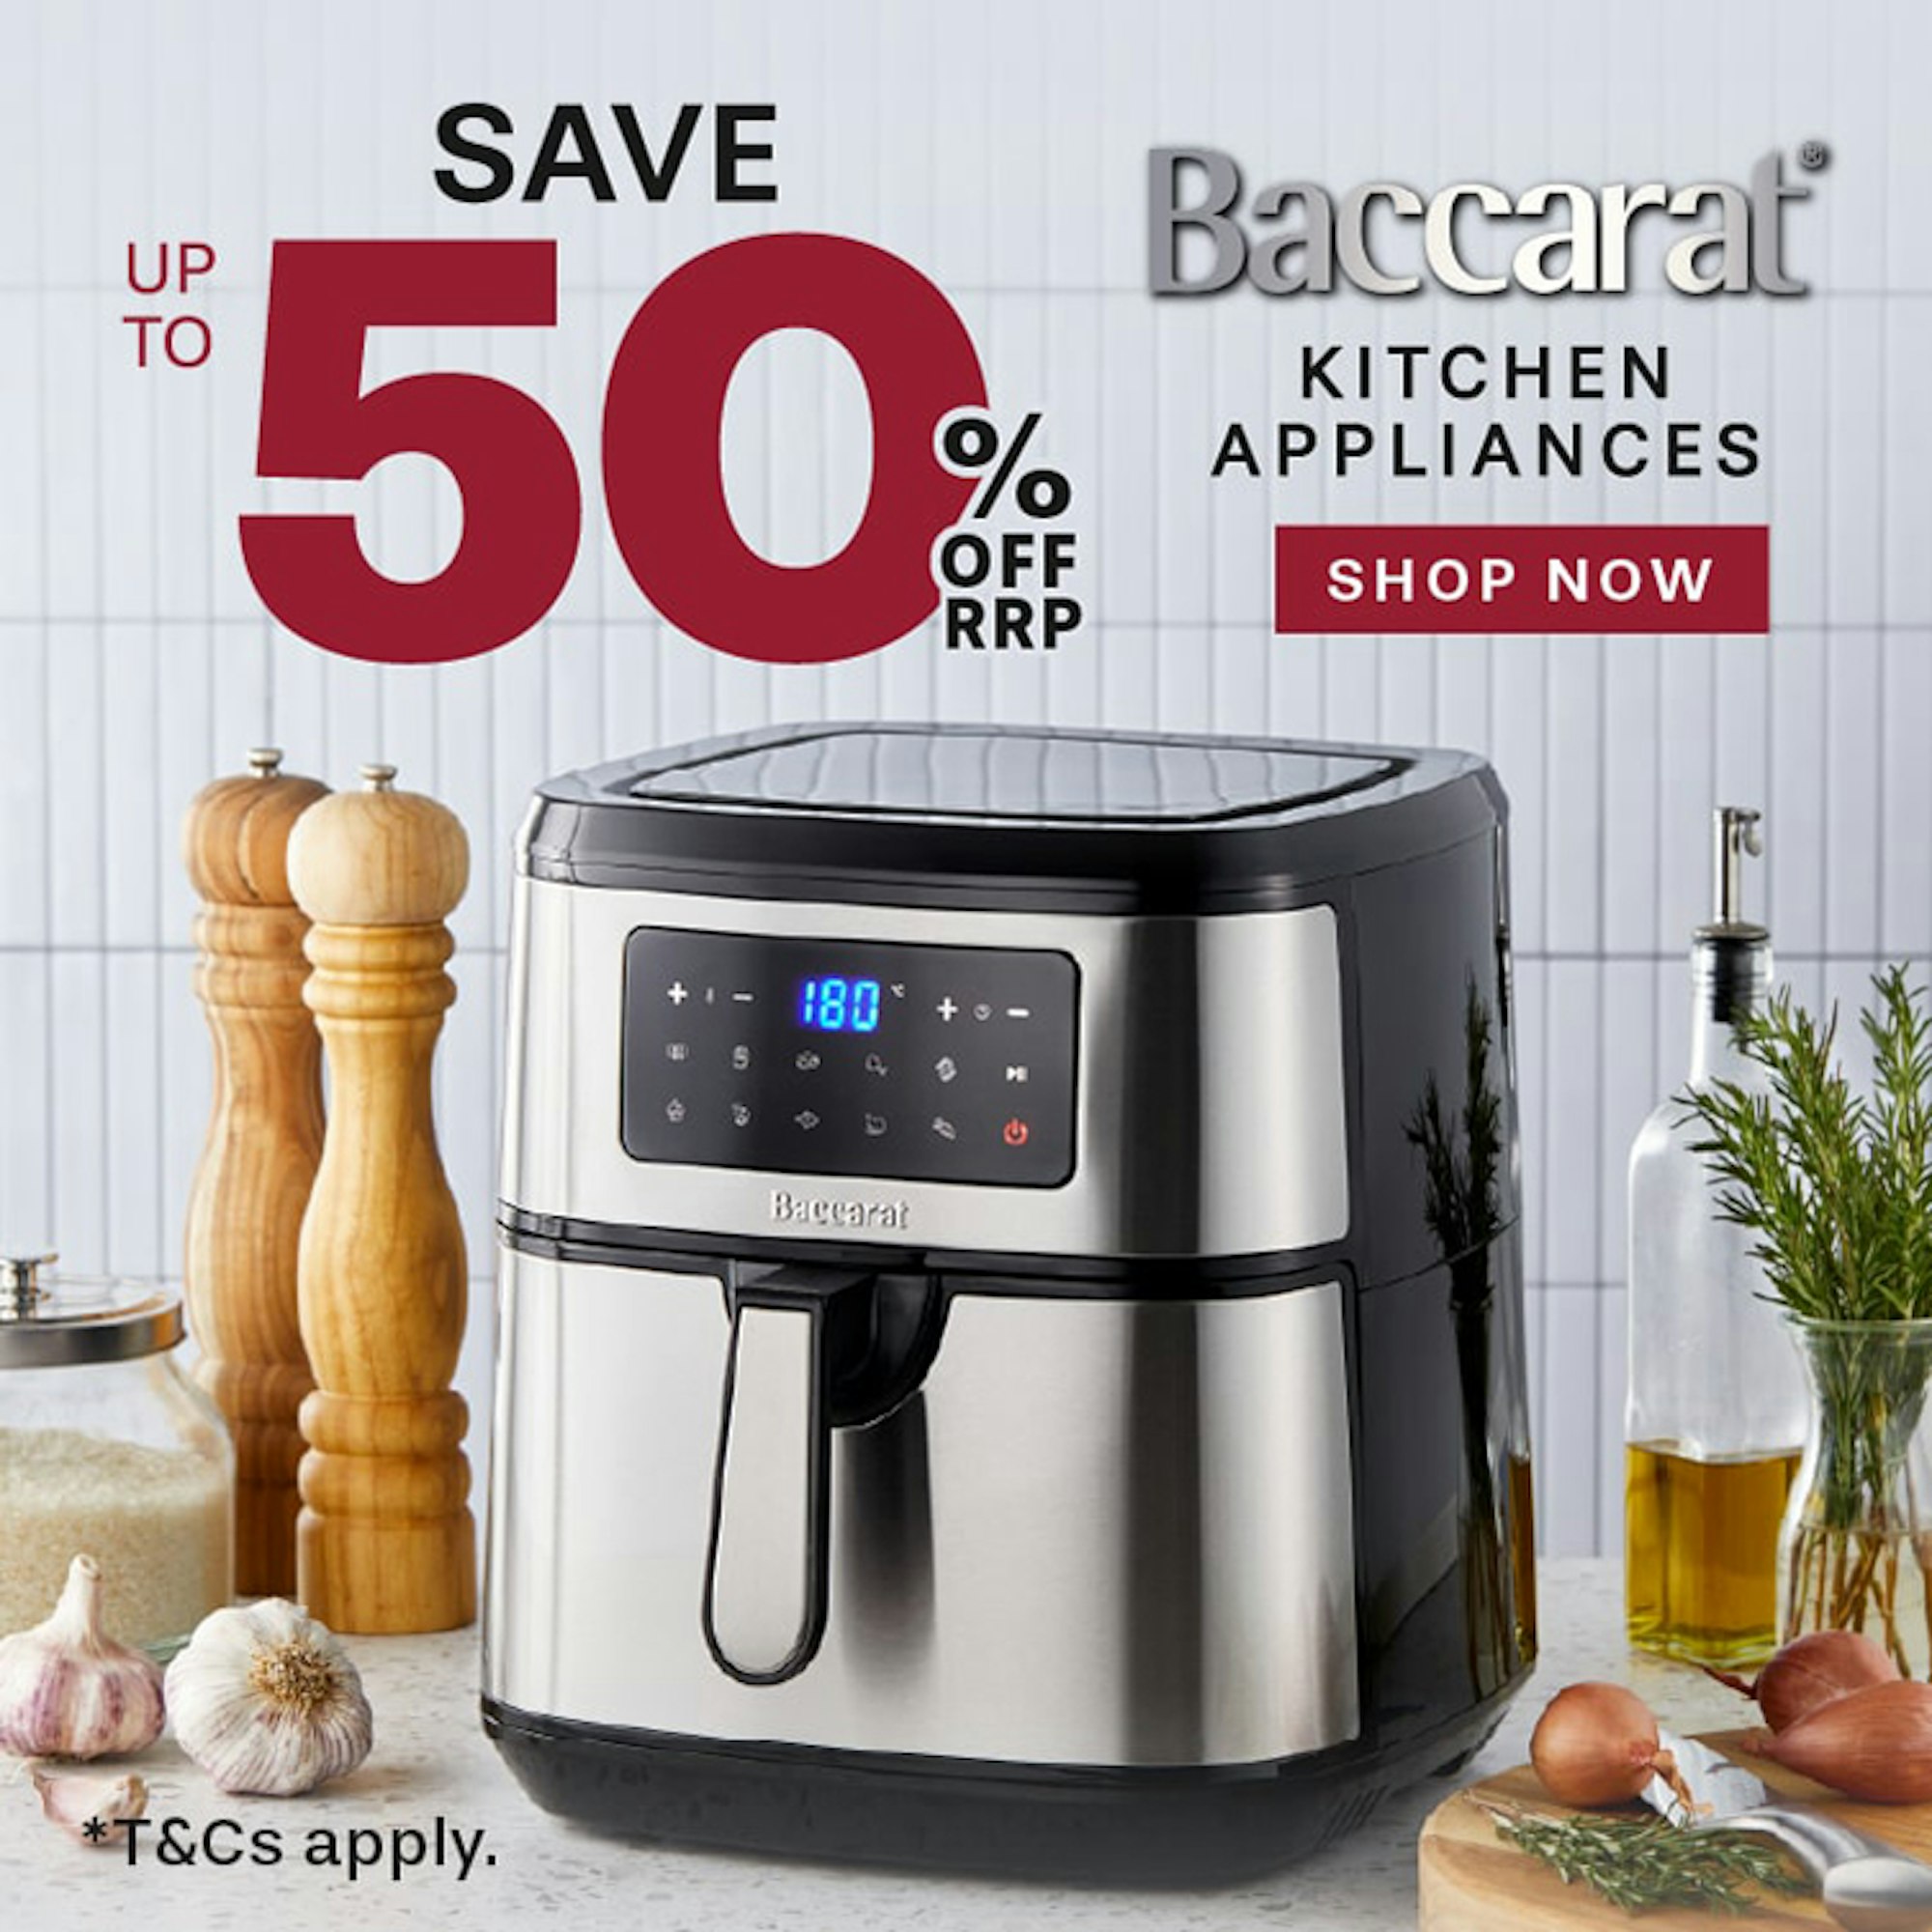 Save up to 50% Off Kitchen Appliances